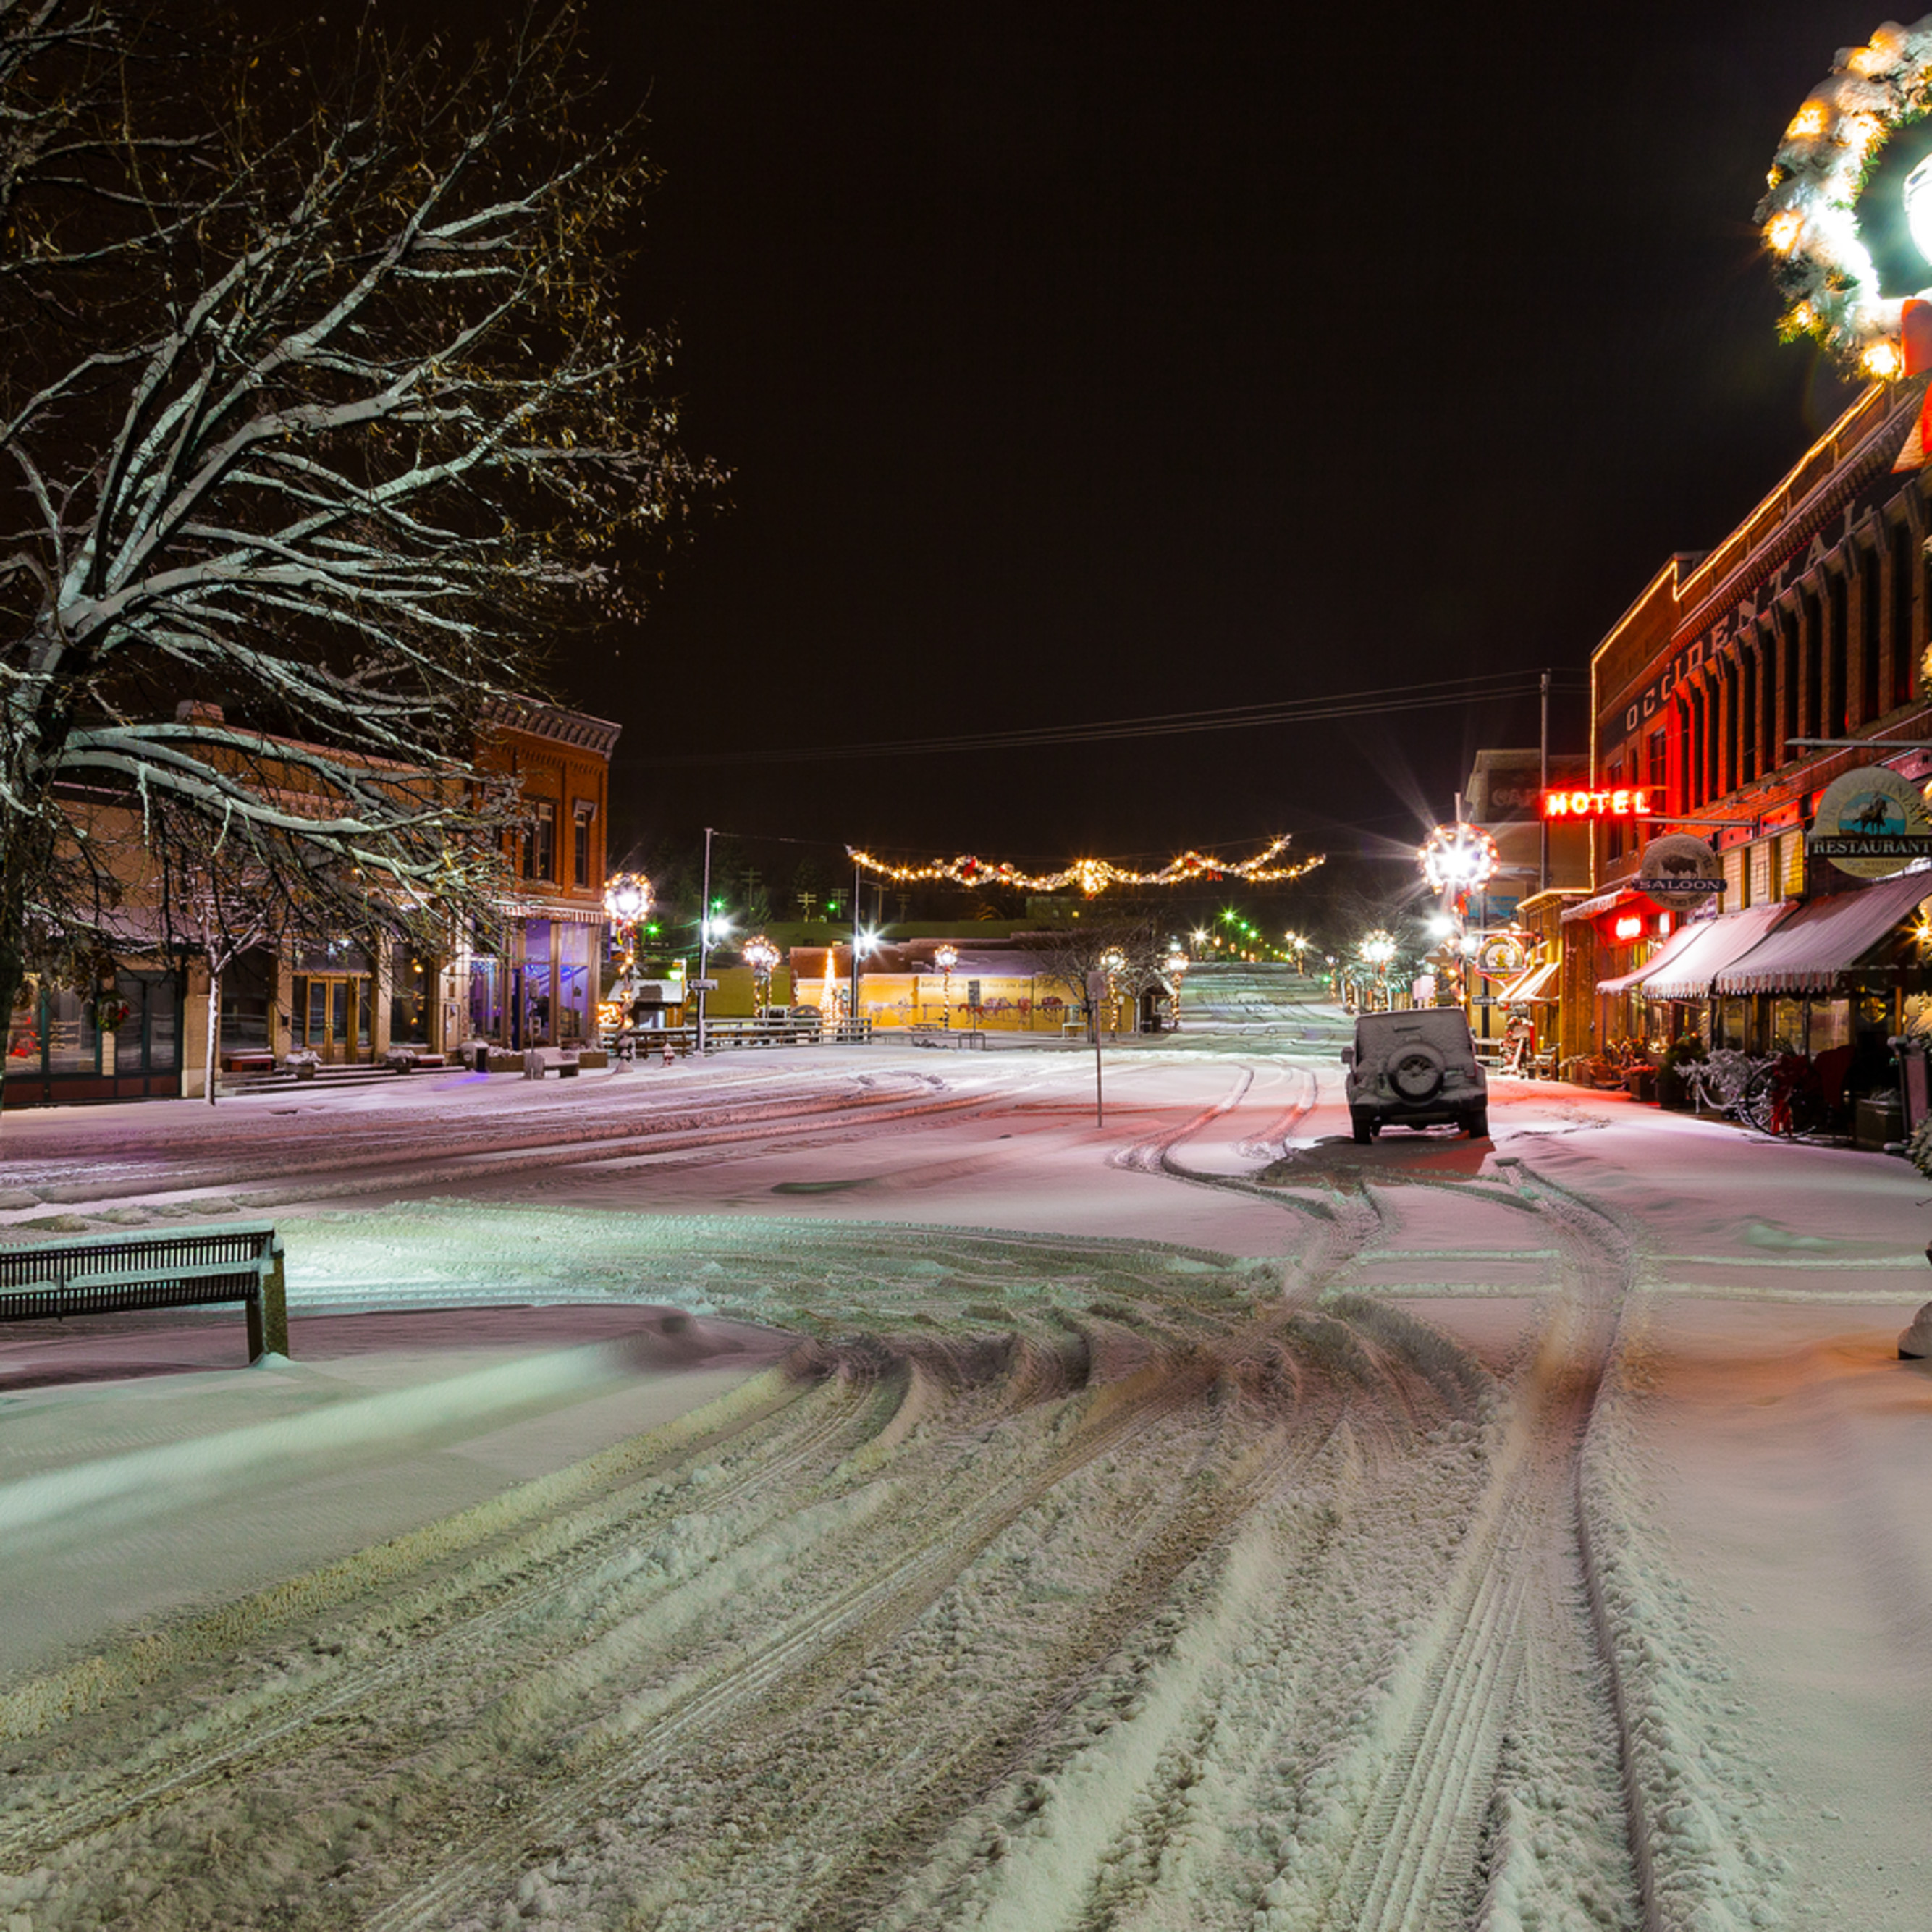 Night photo of Buffalo, Wyoming, downtown after Christmas snow